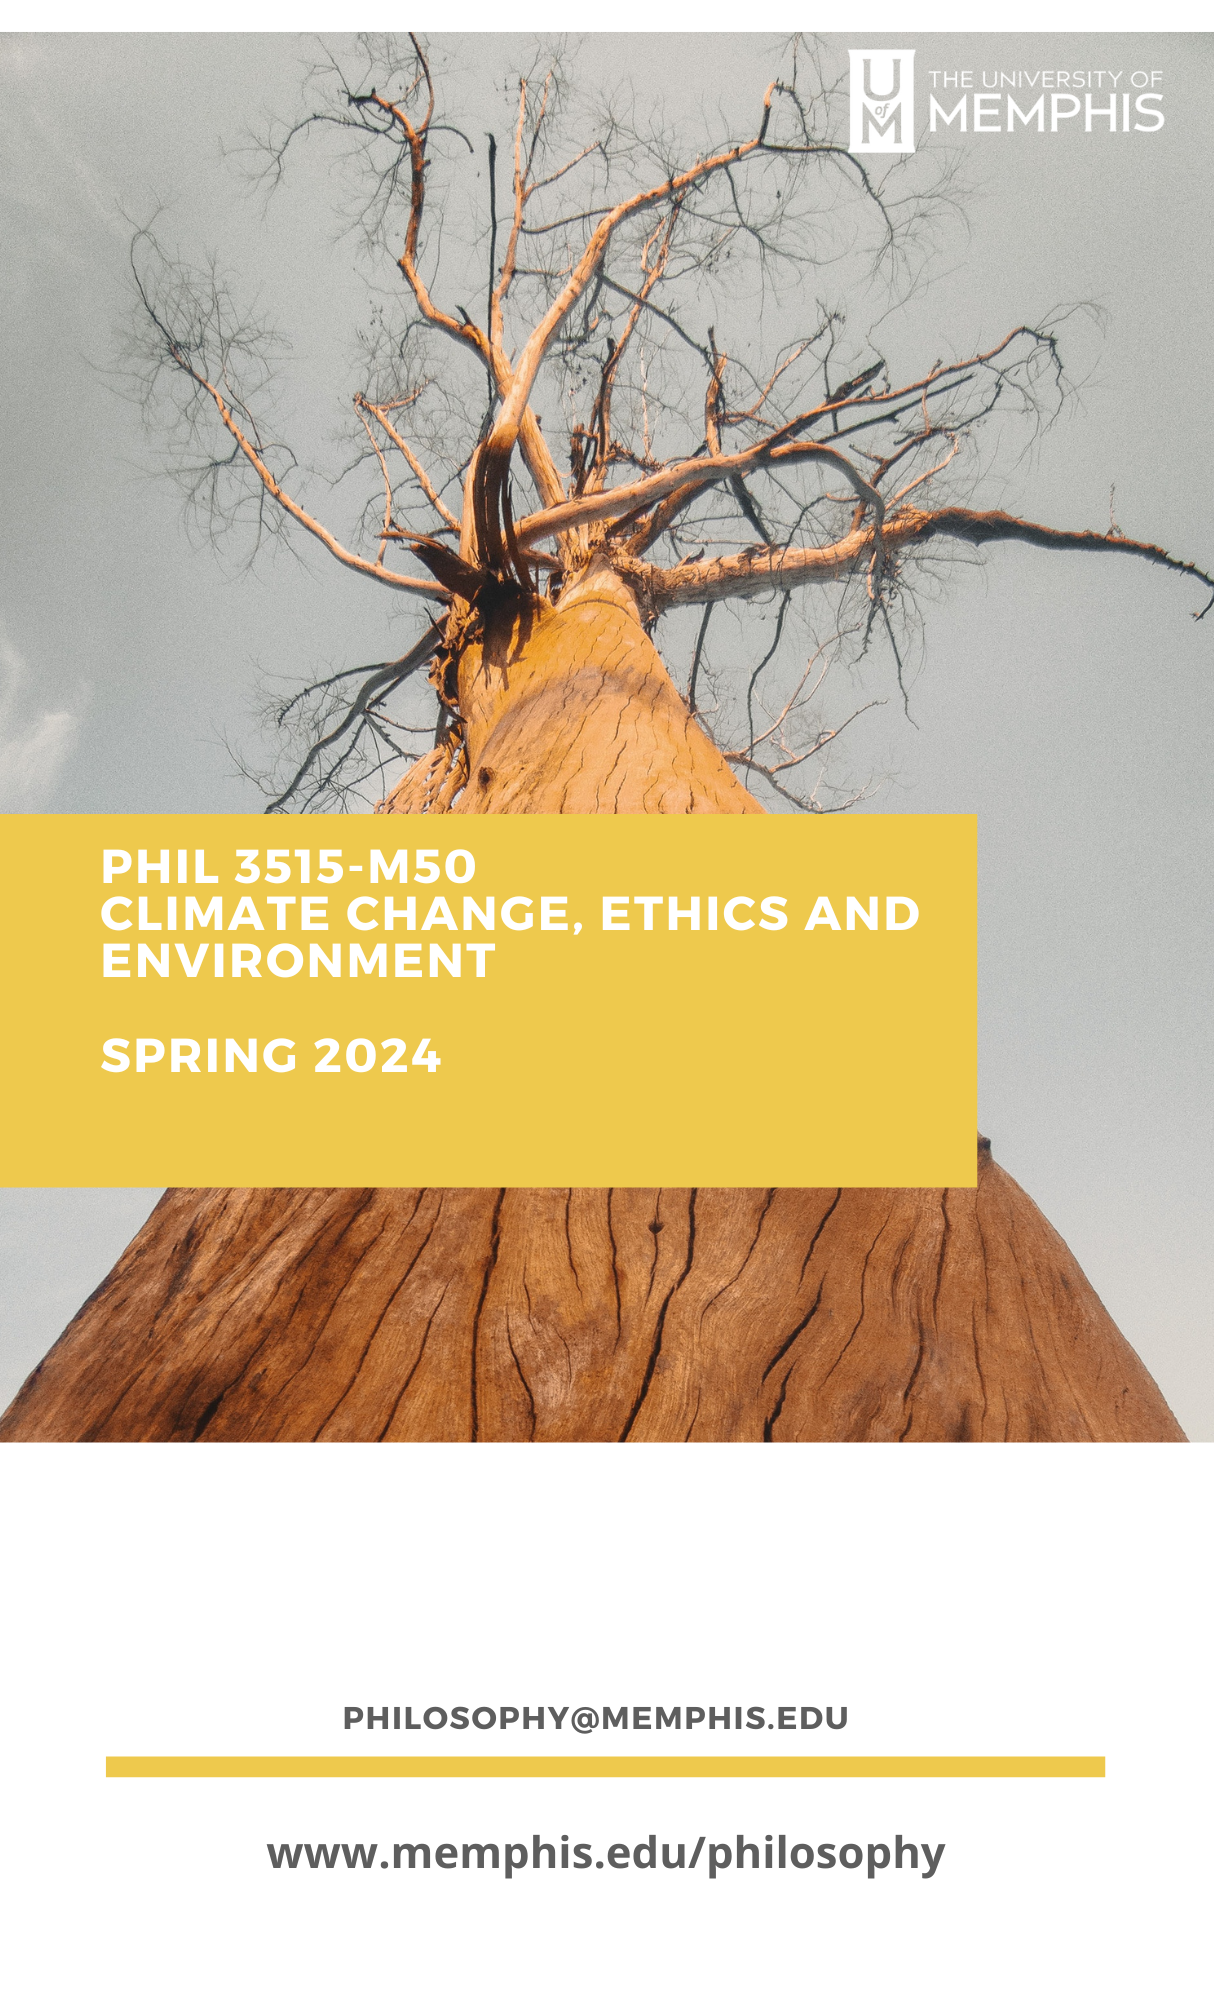 poster of environmental ethics